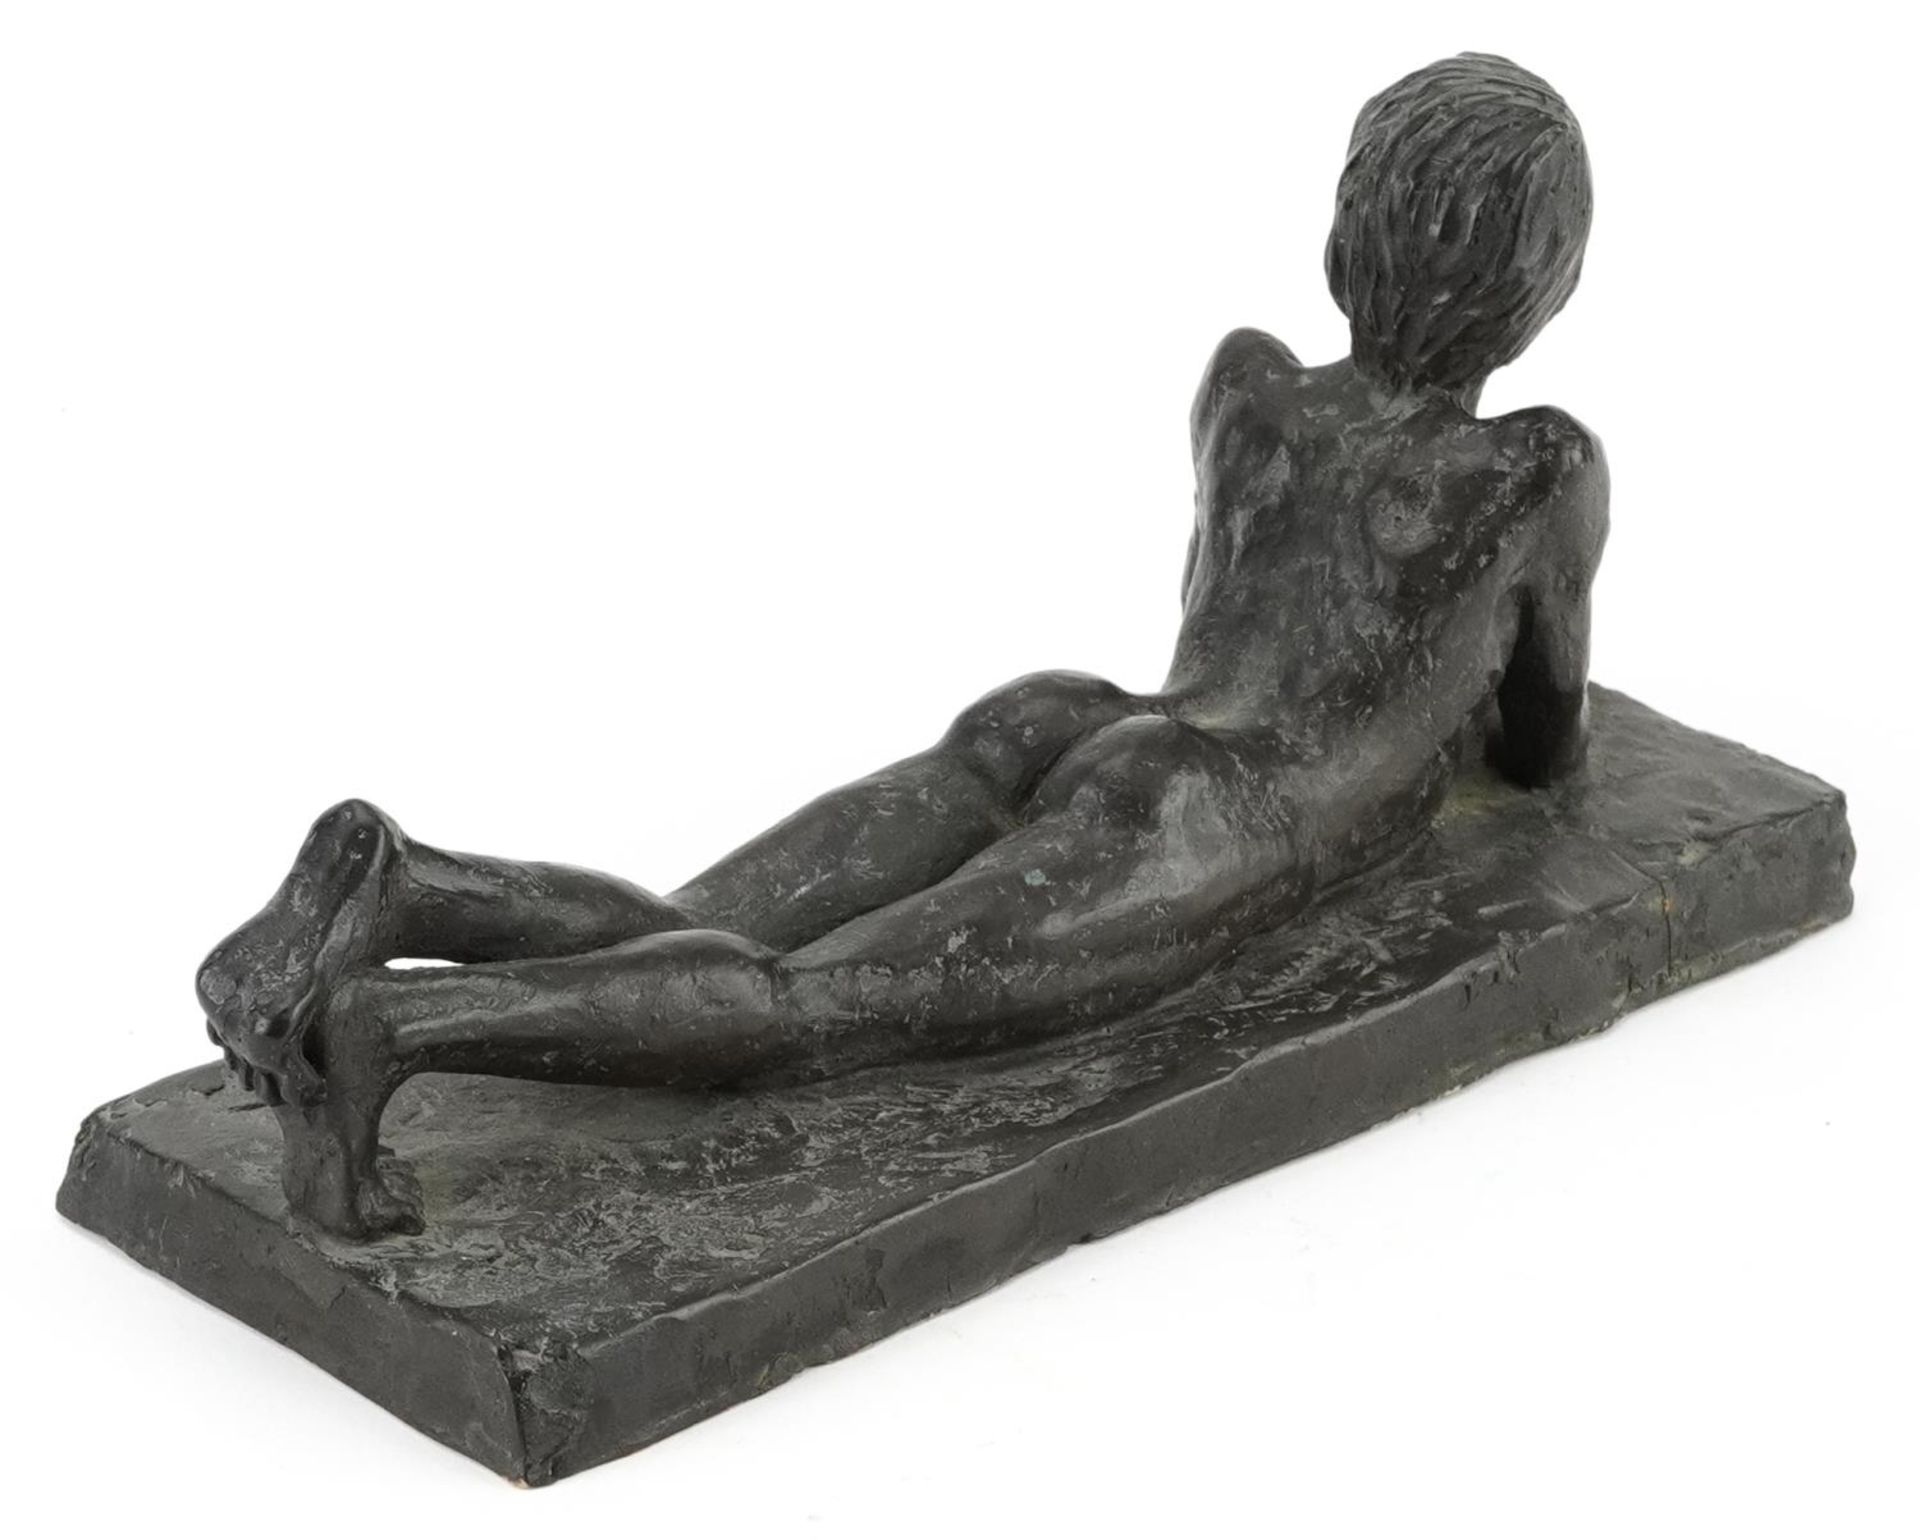 Neil Godfrey 1987, 1980s cold cast bronze statue of a nude young boy, 27cm in length - Image 3 of 4